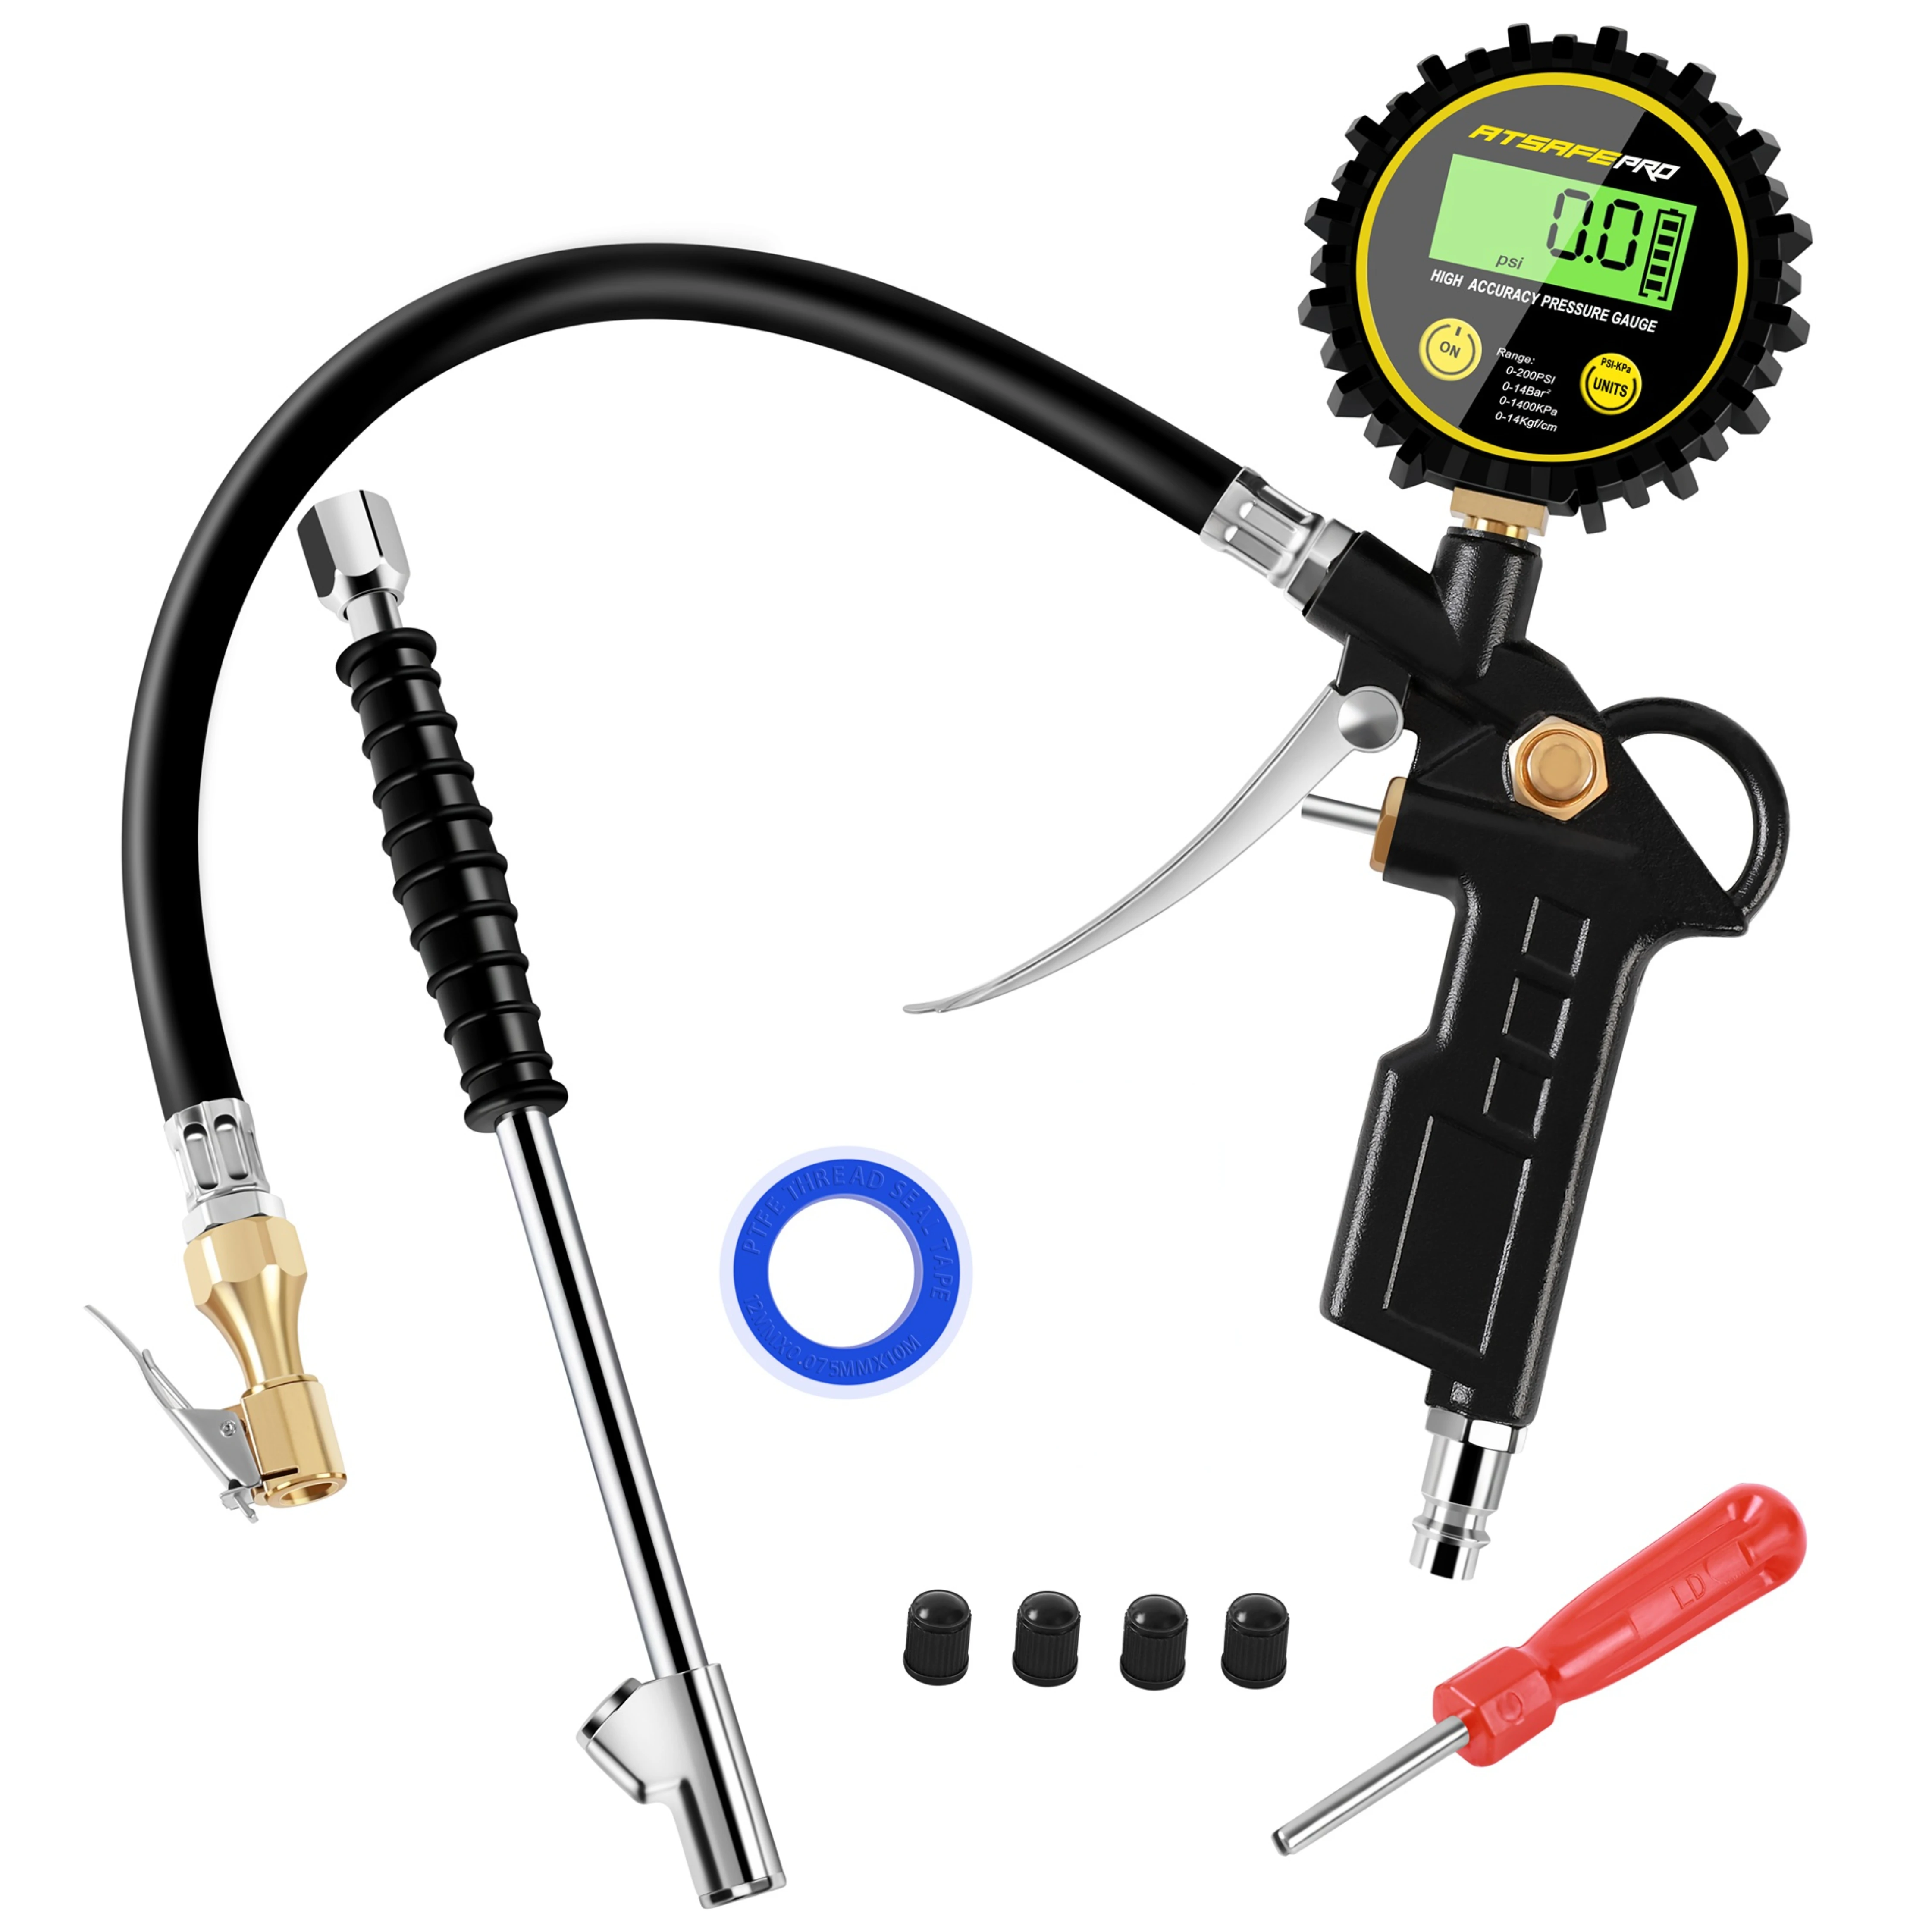 Atsafepro Tire Deflator Pressure Gauge 75psi 2 In 1 Professional Rapid  Deflate Special Chuck For 4x4 Large Offroad Tires On Jeep - Tire Pressure  Monitor Systems - AliExpress